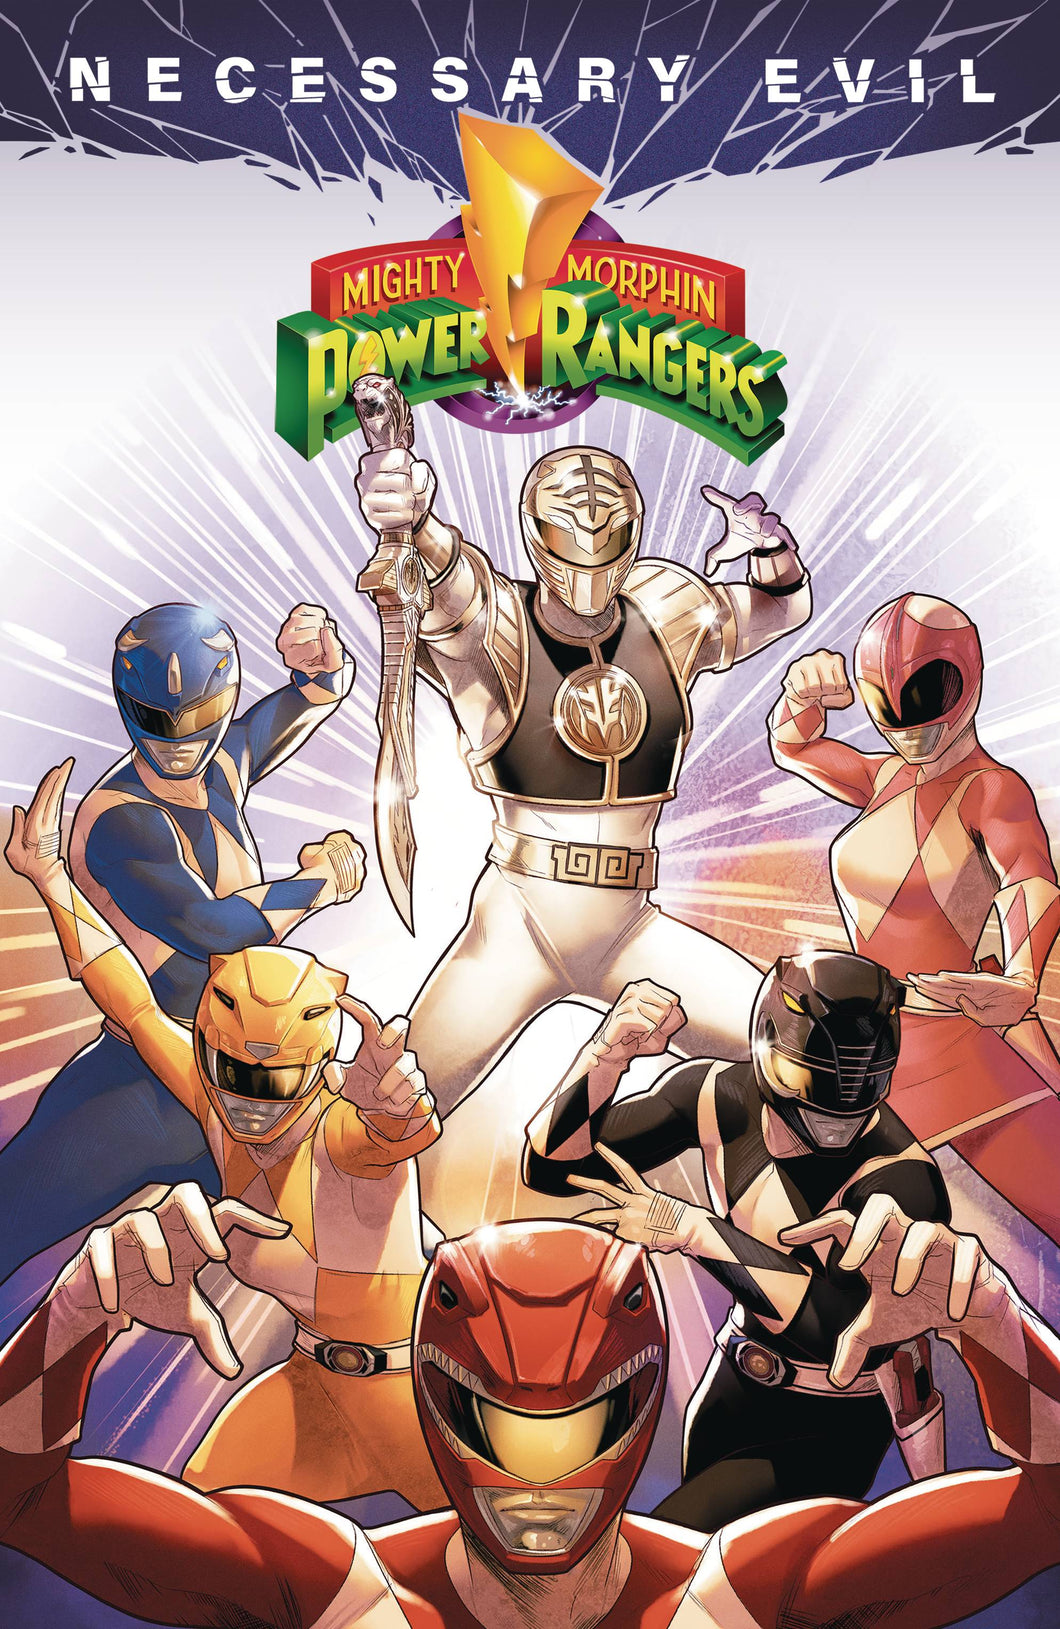 MIGHTY MORPHIN POWER RANGERS NECESSARY EVIL TP VOL 01 cover